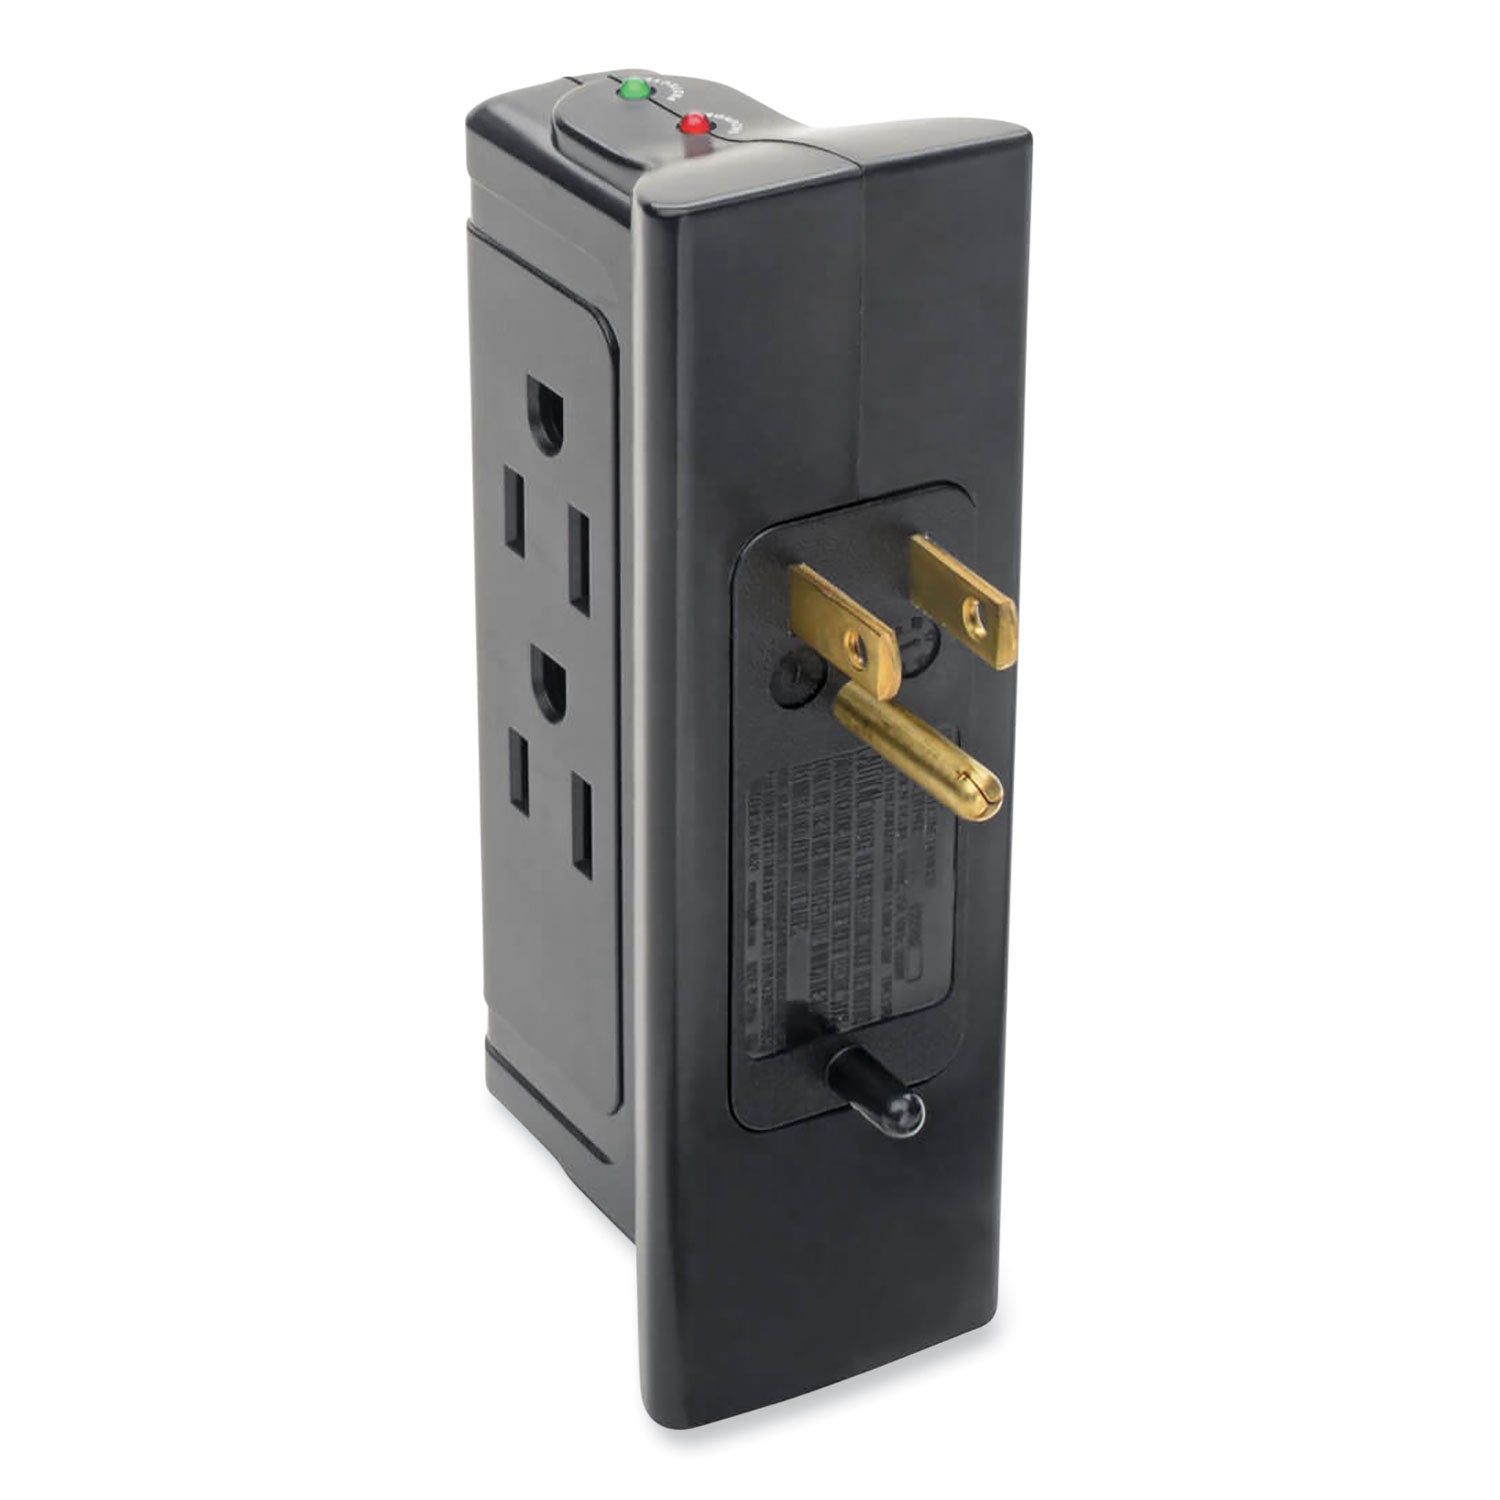 Protect It! Surge Protector, 4 AC Outlets, 720 J, Black - 